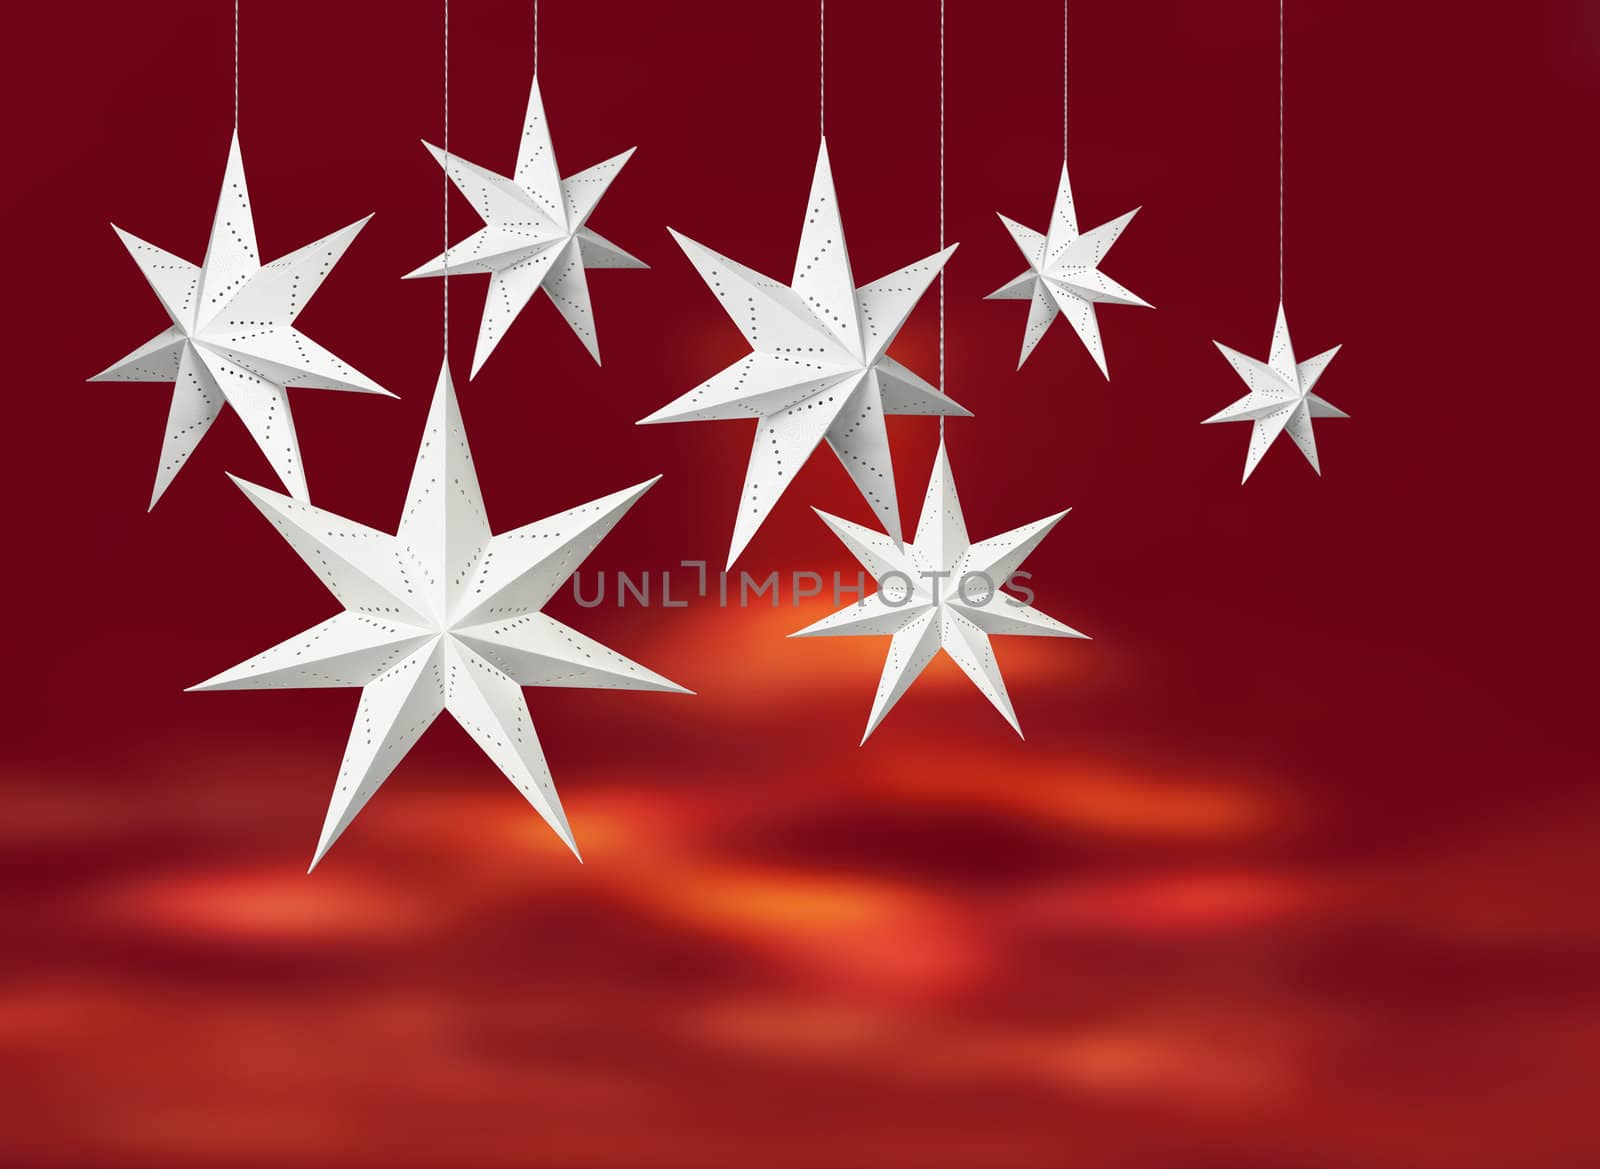 White Christmas decoration paper stars hanging on vivid red background